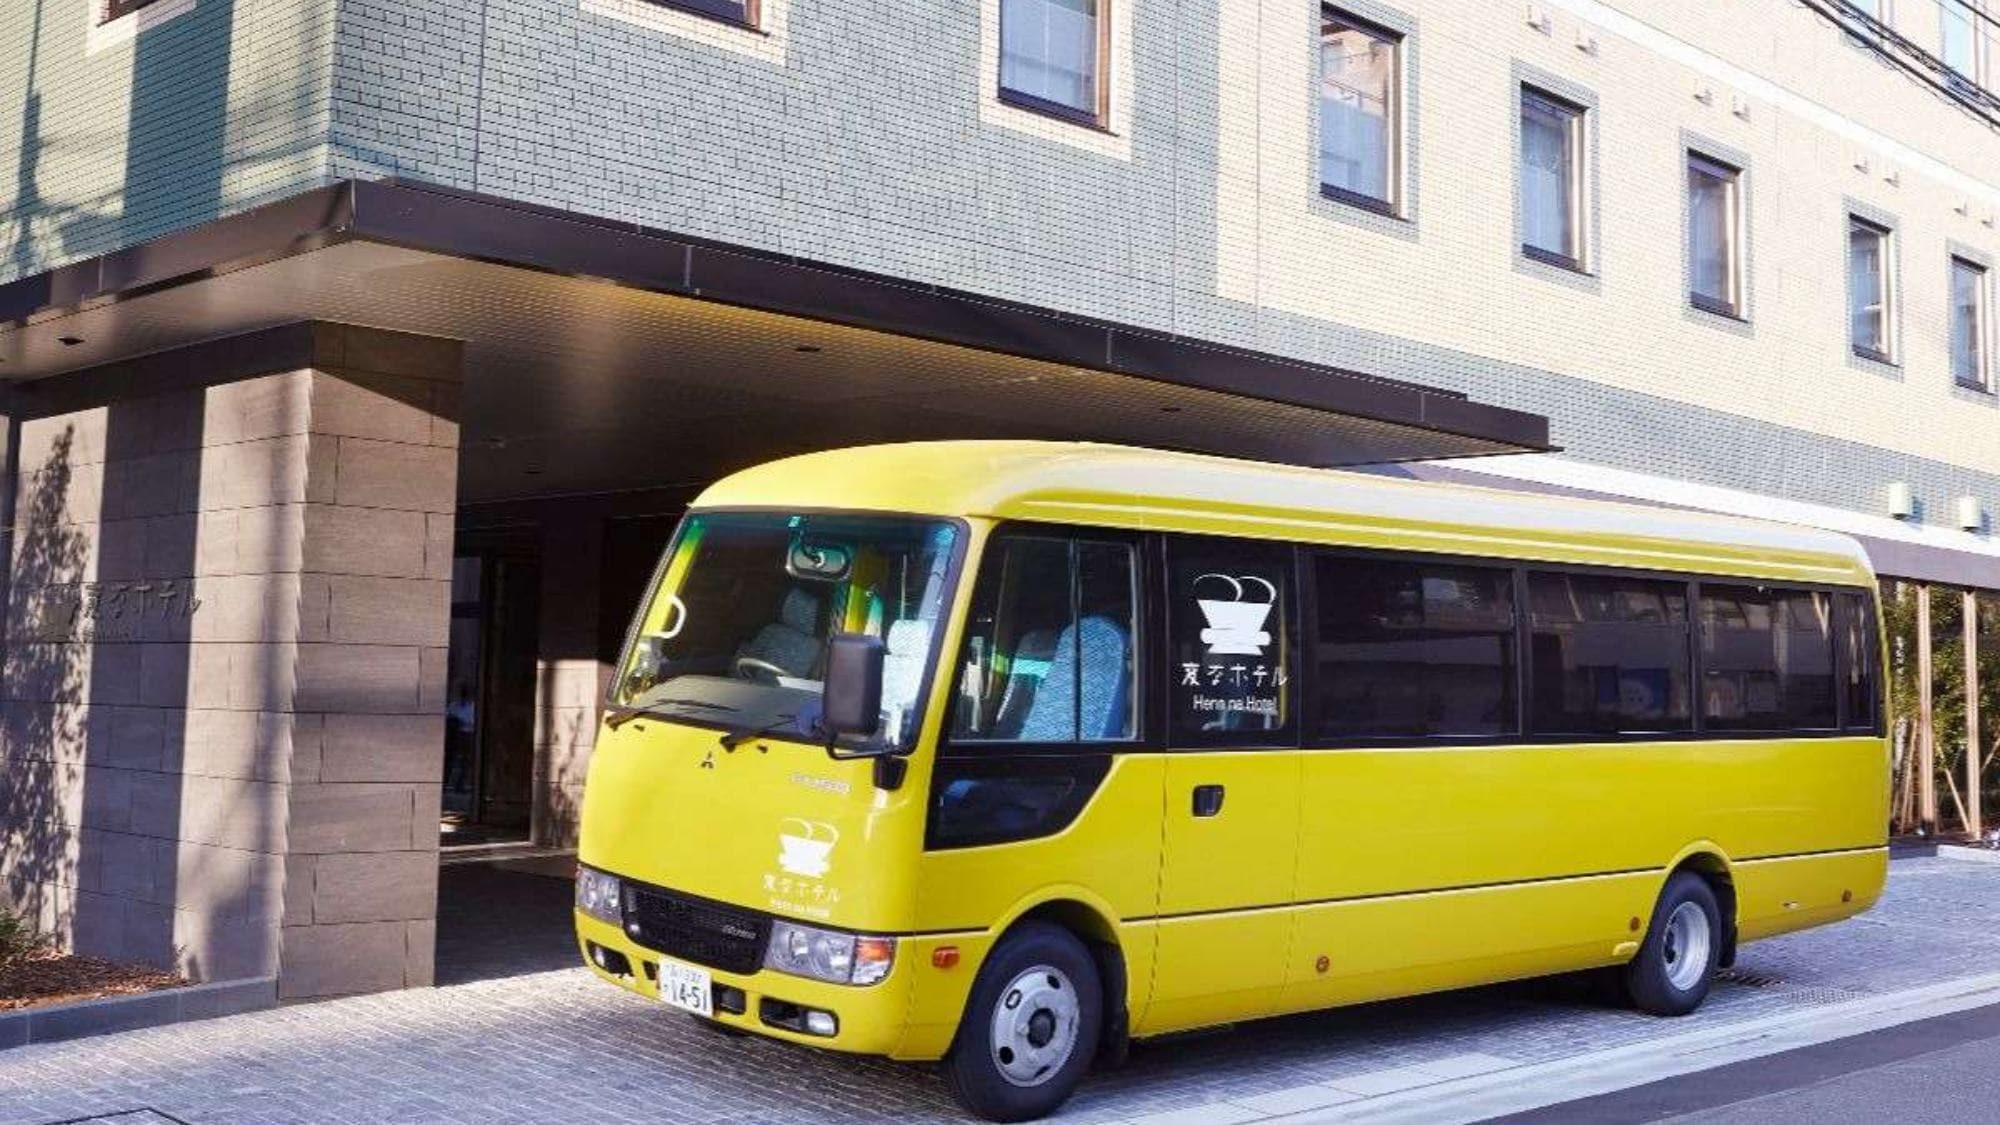  Convenient hotel & hArr; Free shuttle bus between airports daily